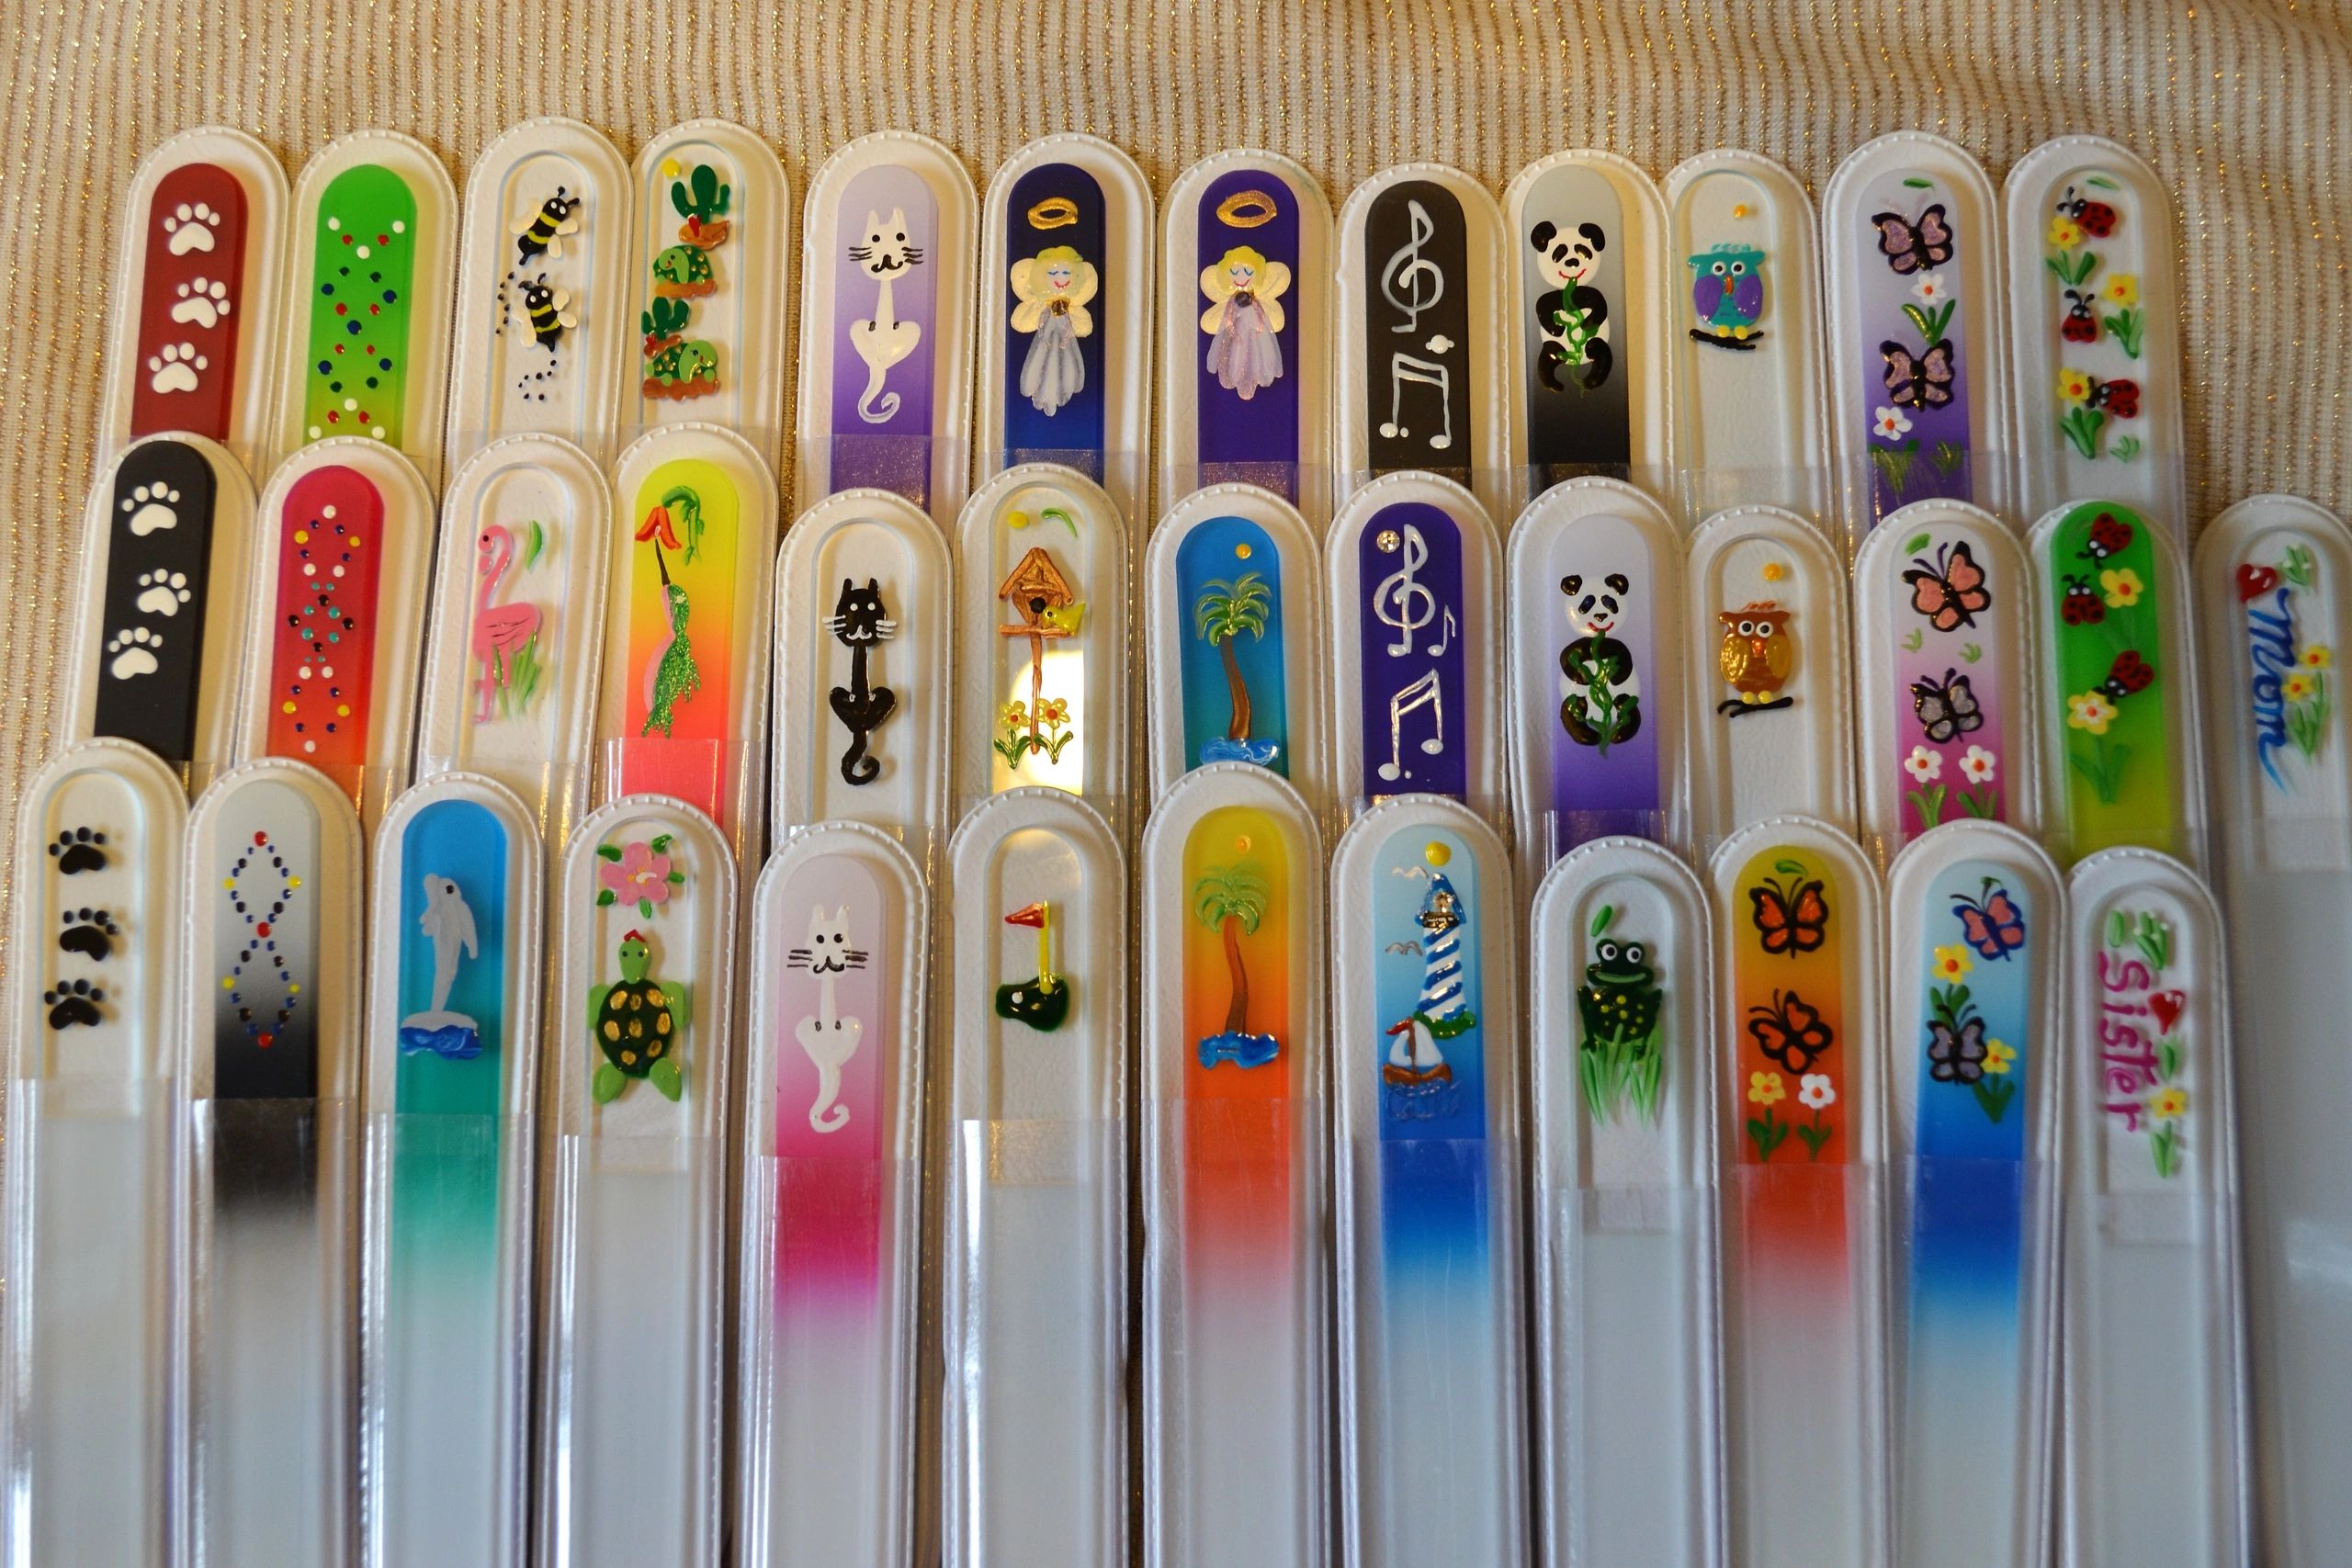 Many fun designs hand painted on various colors of Crystal glass fingernail files. 